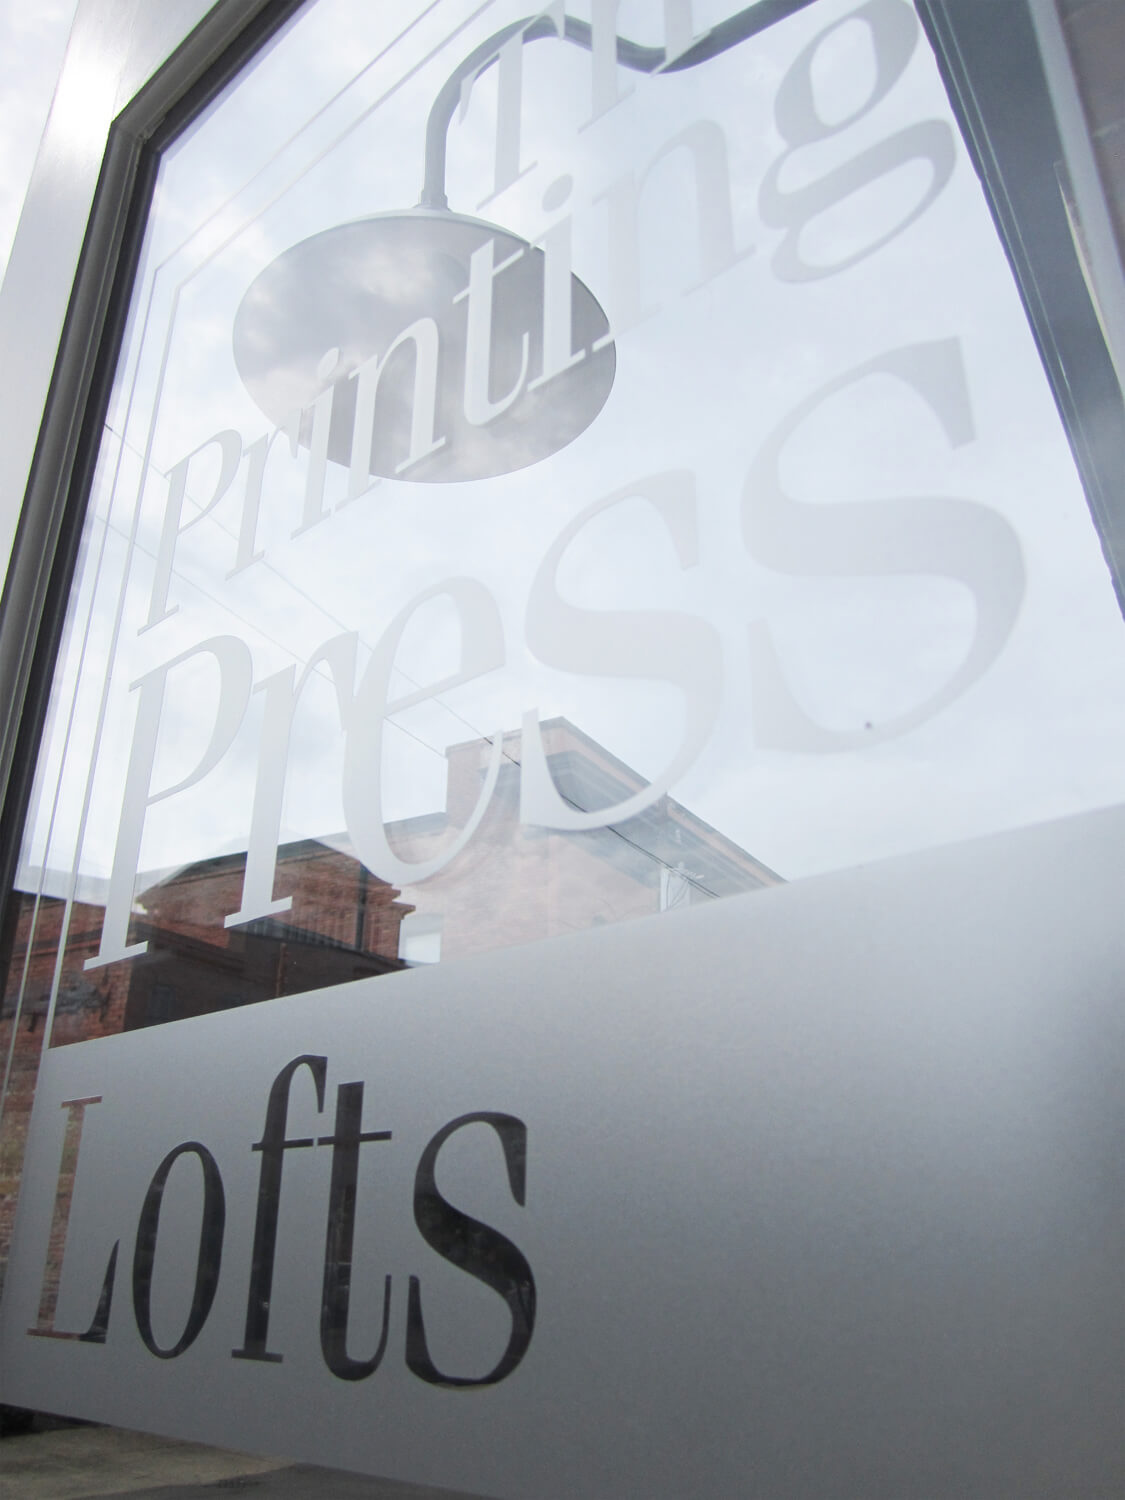 Printing Press Lofts Designed by Foshee Architecture - Sign on Front Door